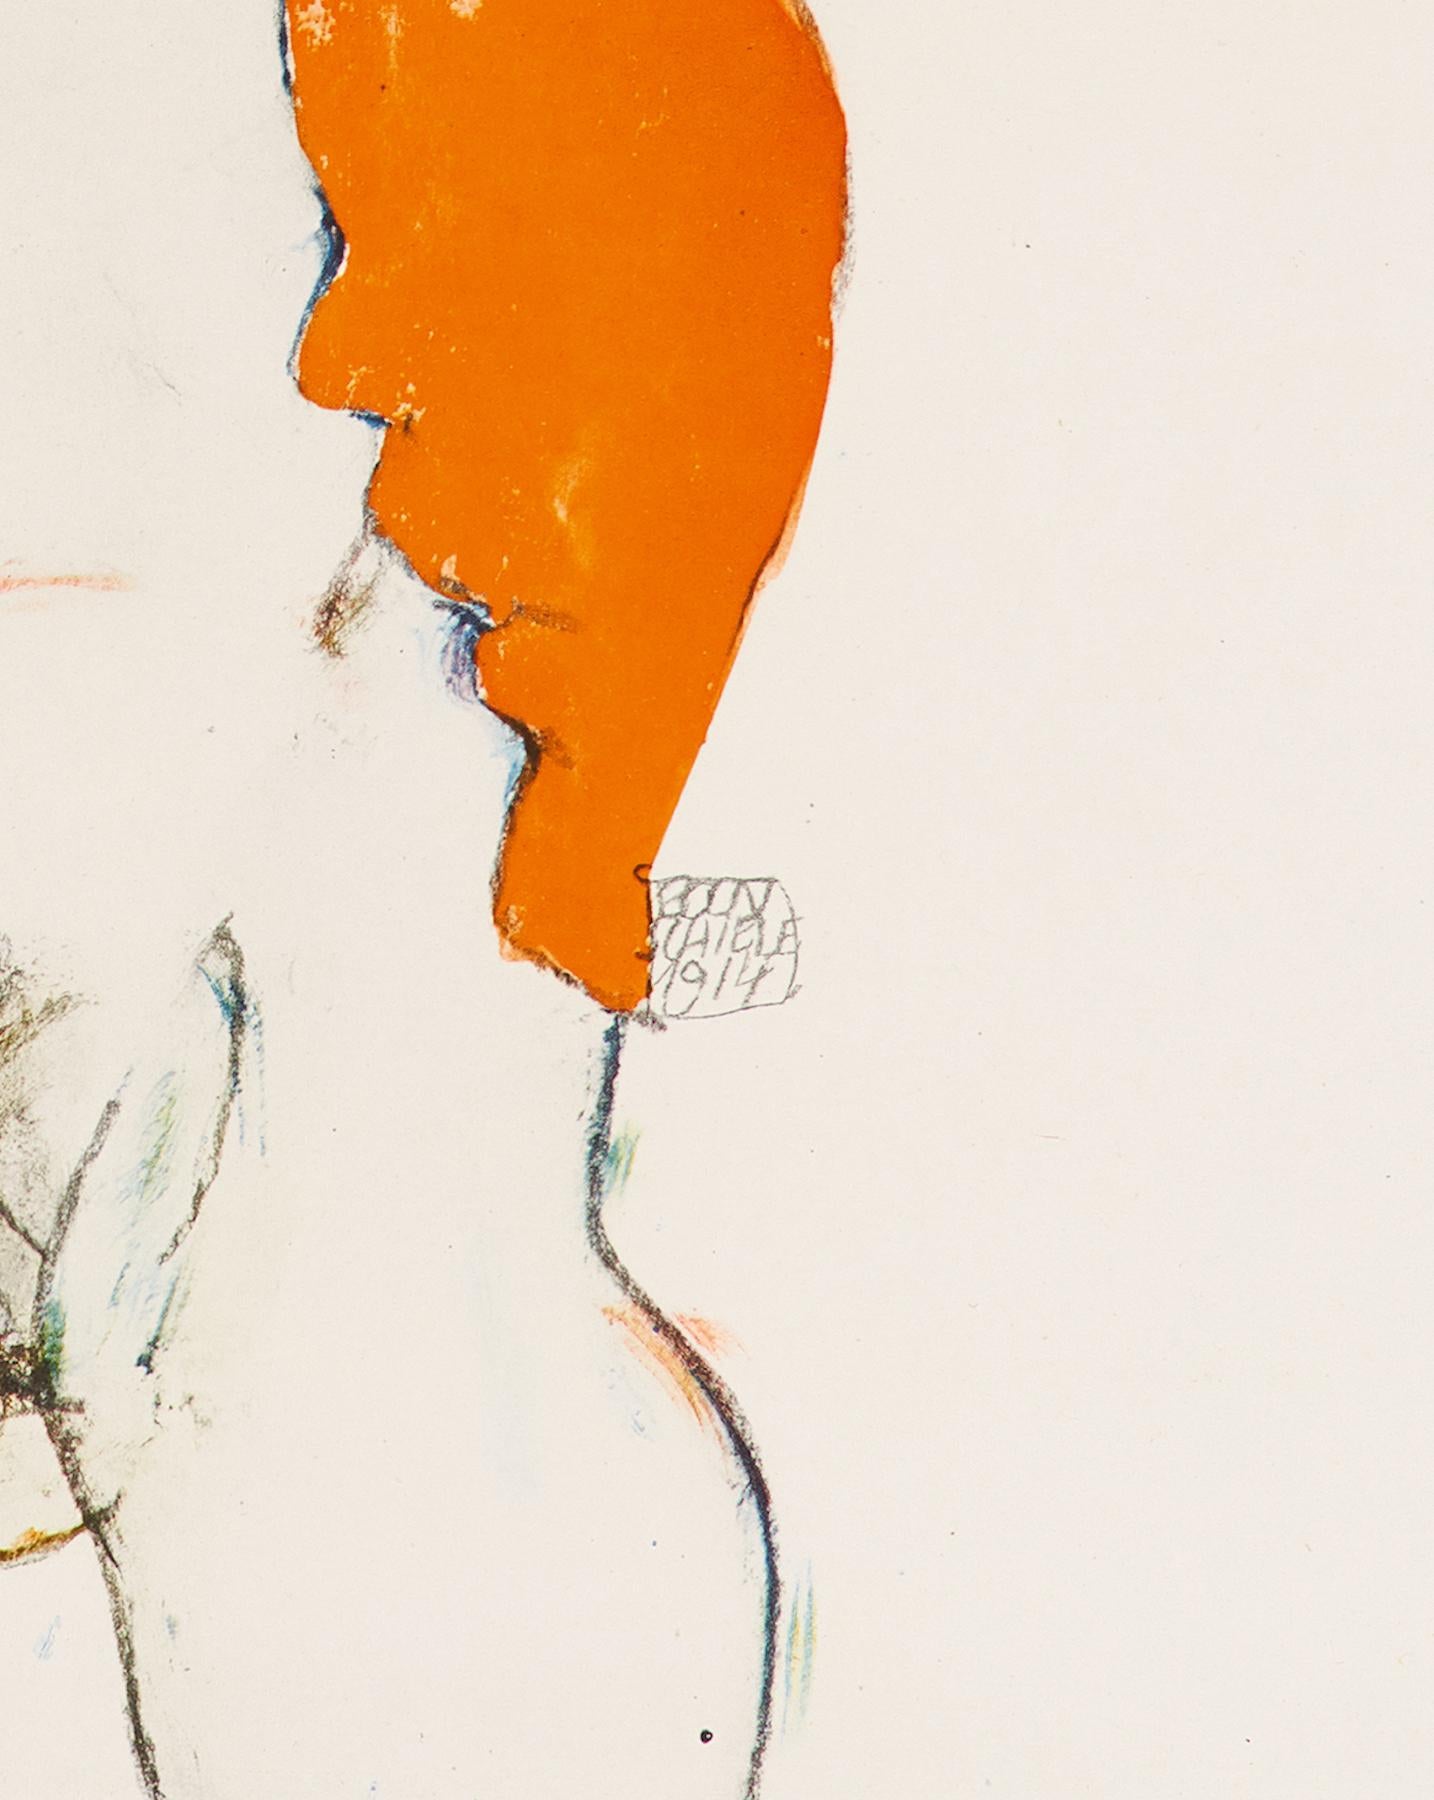 Sitting Female Nude is a beautiful colored collotype from the series “Handzeichnungen” (1920), a fine art portfolio by Egon Schiele.

Signed on plate “Egon Schiele 1914” on the lower right margin. This is one of the four colored collotypes of the